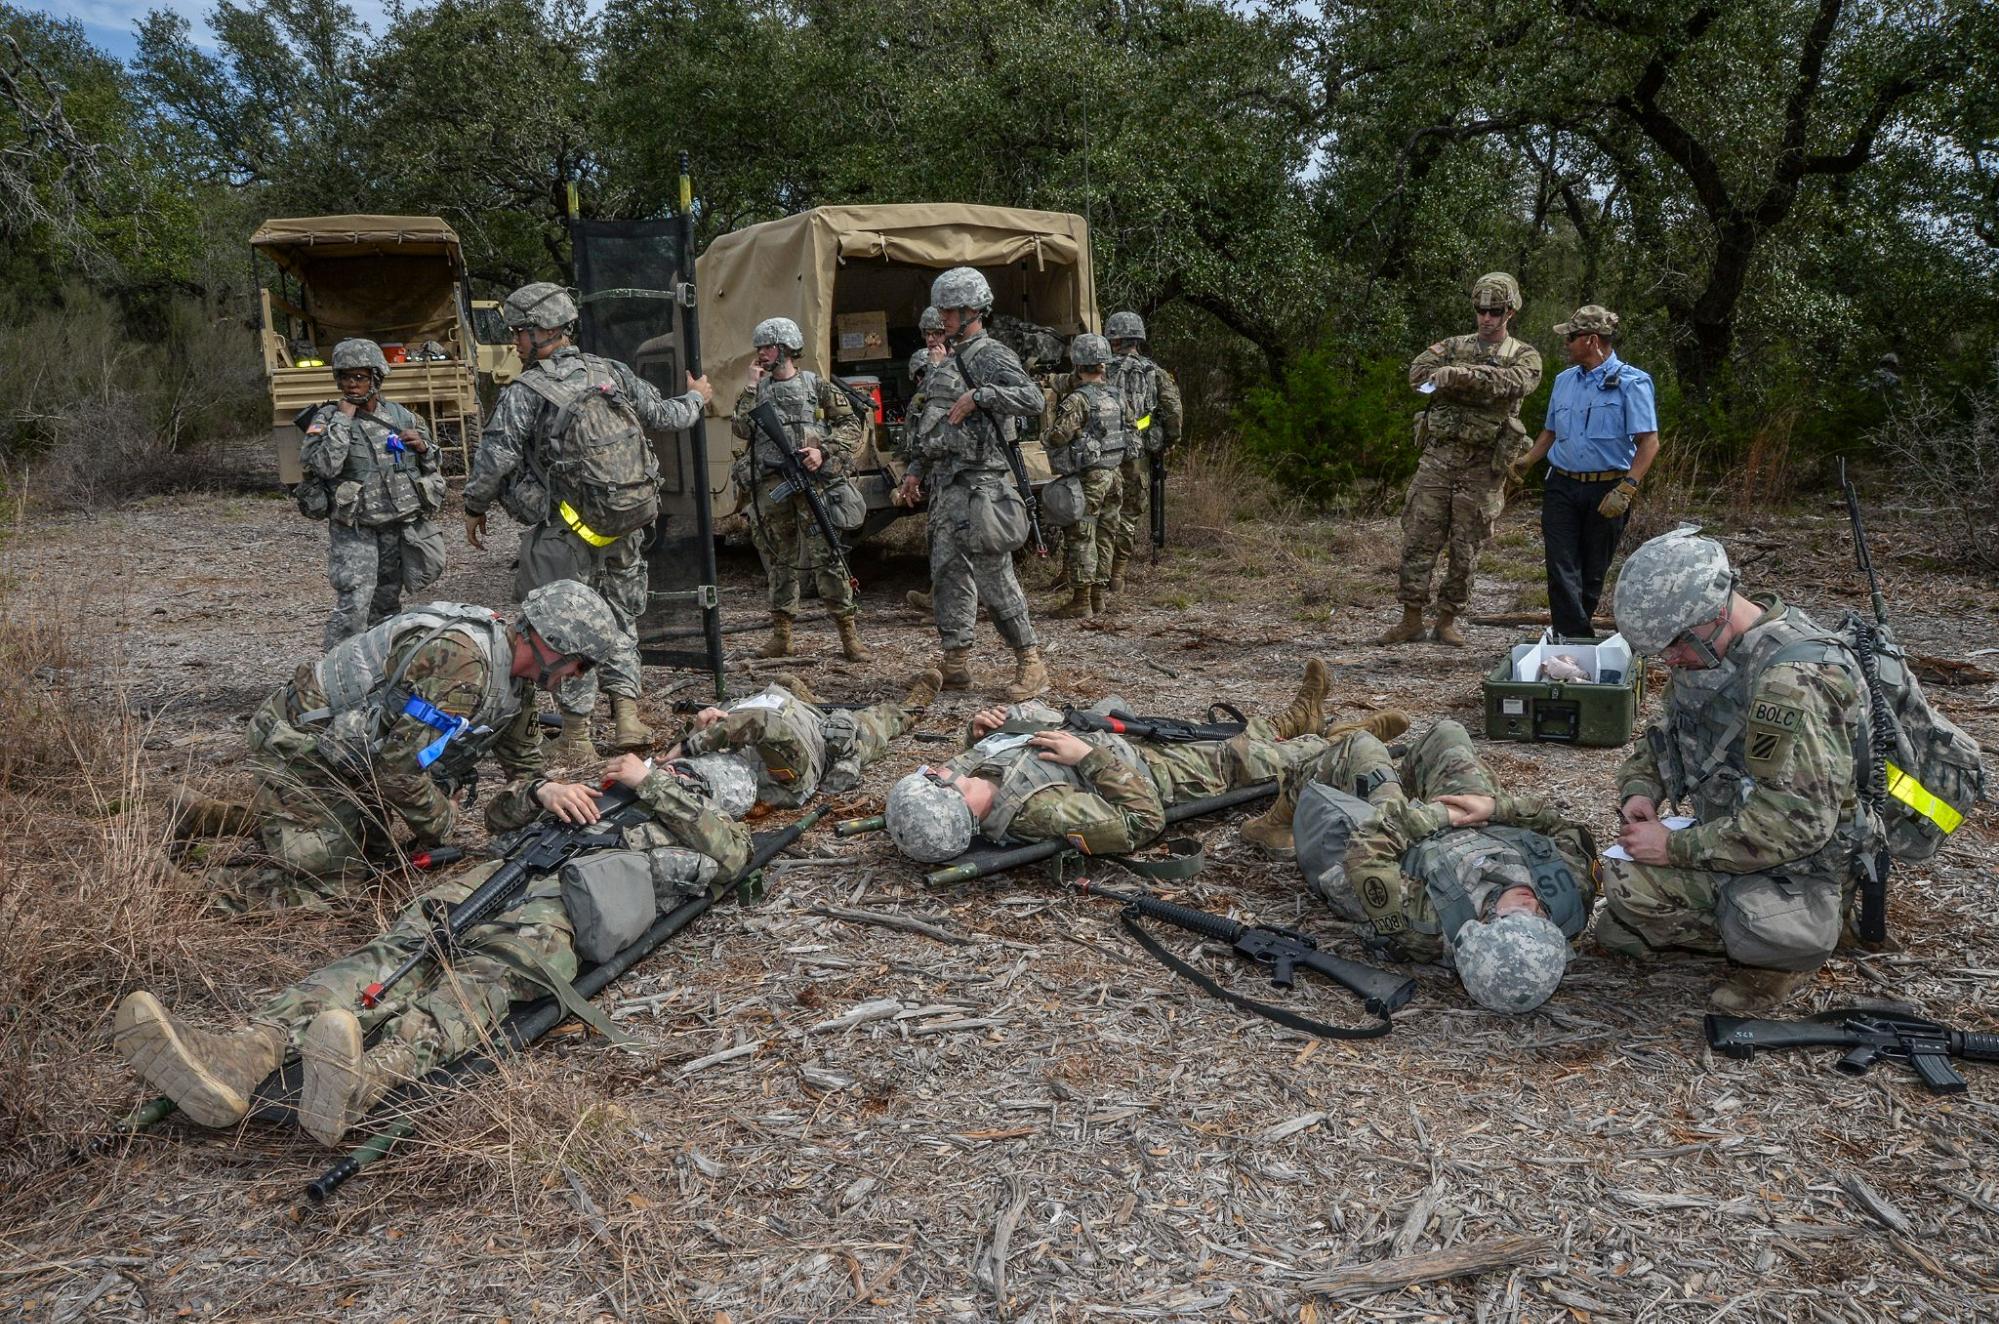 During a training exercise, soldiers take care of wounded soldiers while others unload a truck. U.S. Air Force photo by Johnny Saldivar courtesy of DVIDS